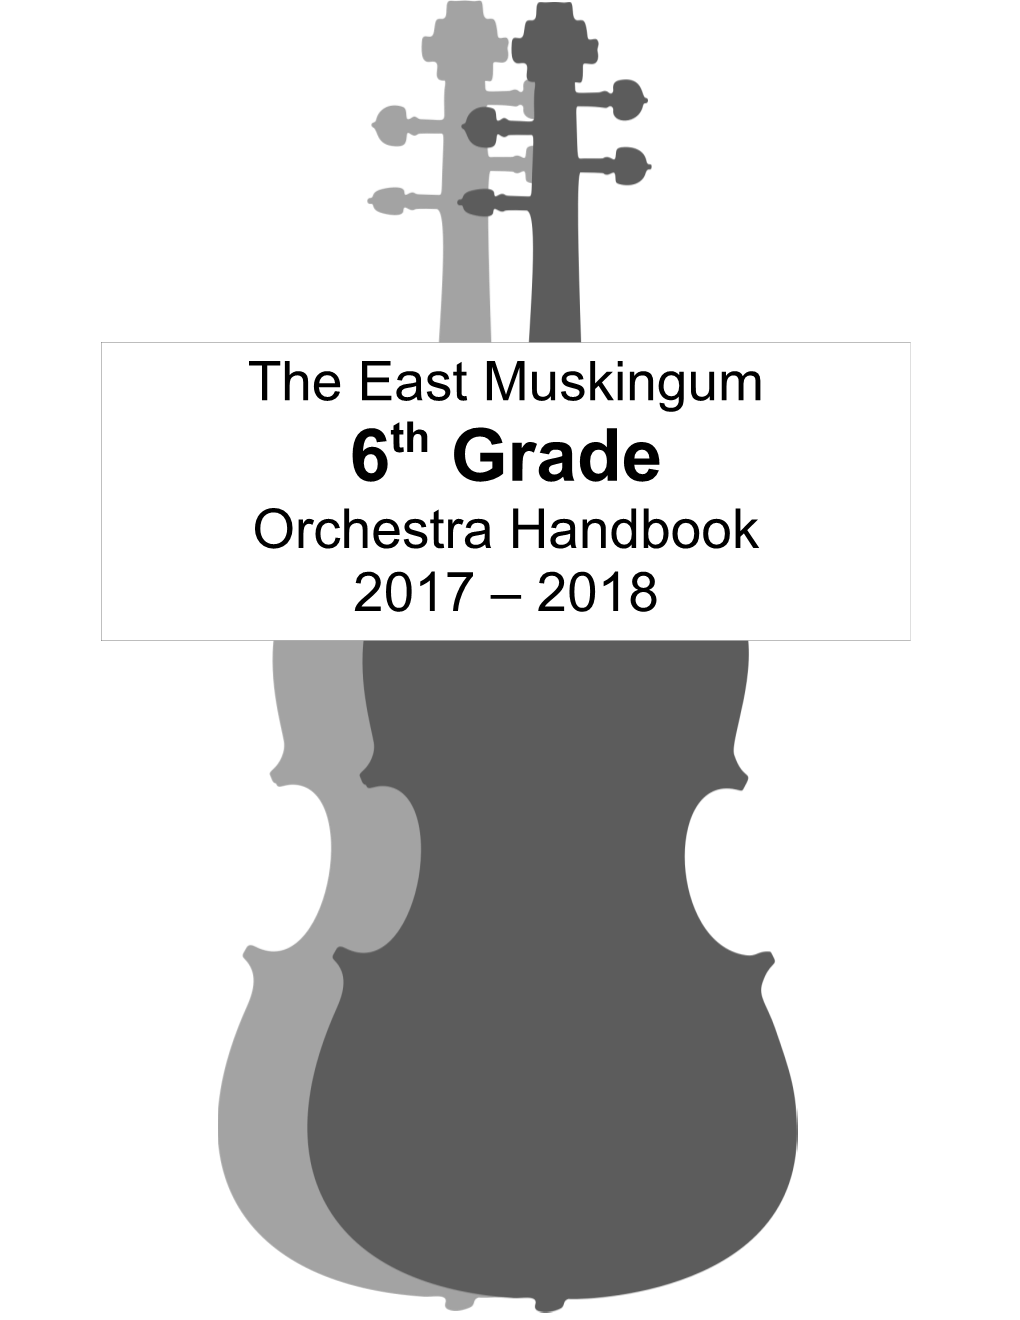 Dear Orchestra Students and Parents